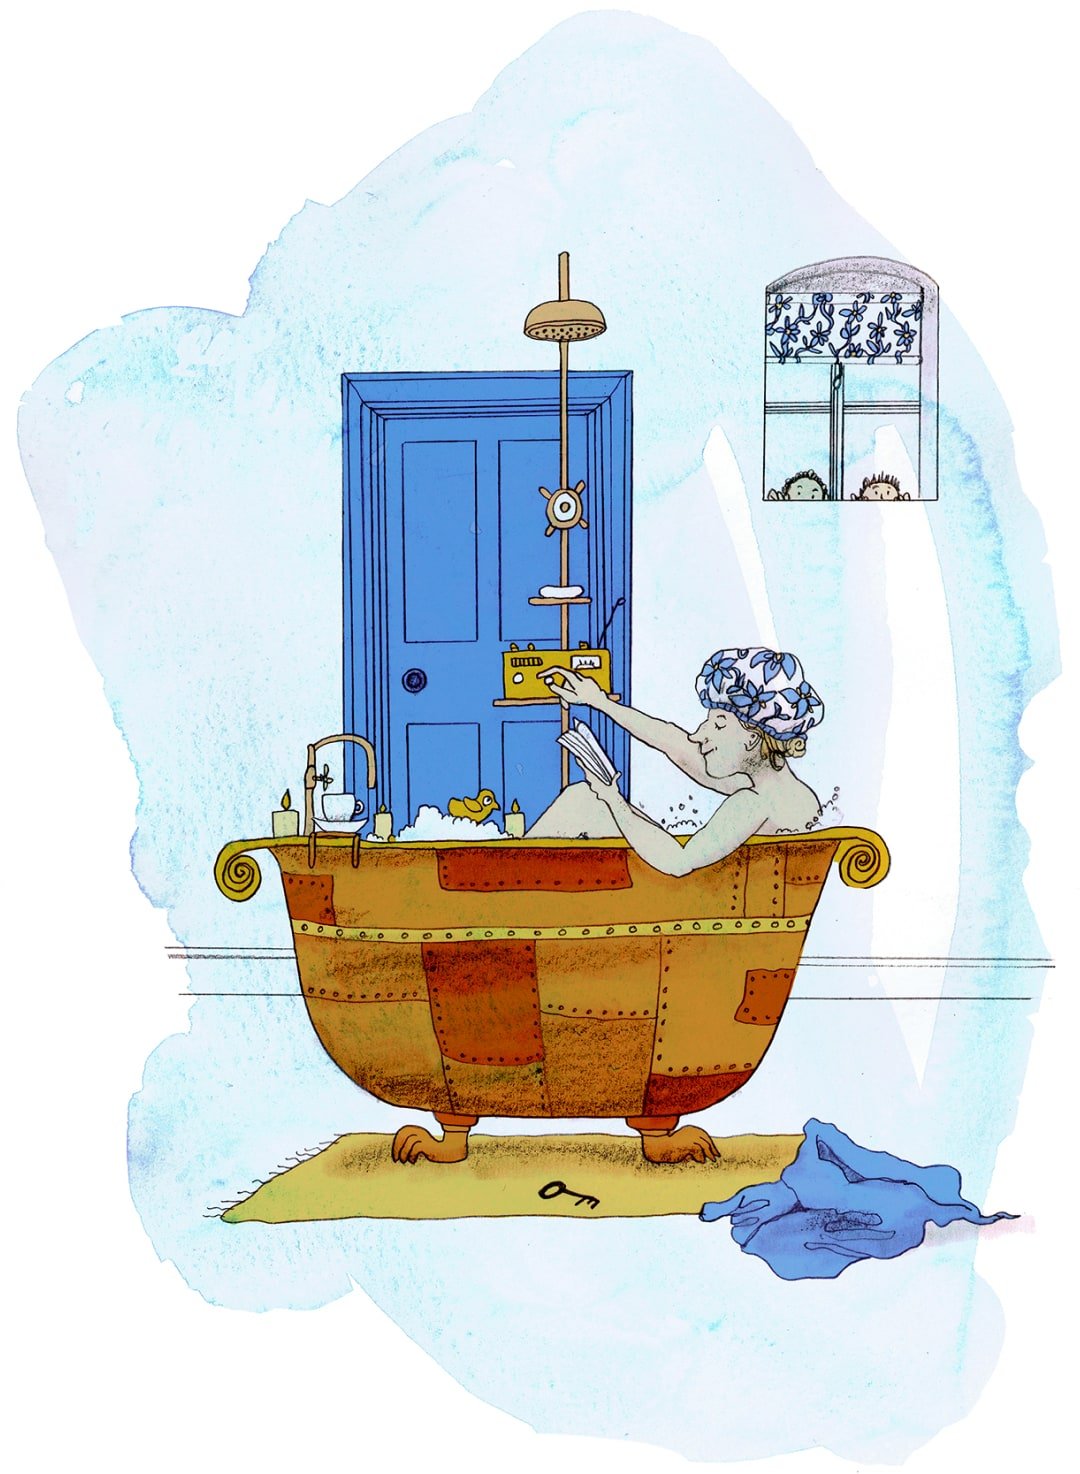 Someone is sat in a tin bath wearing a shower cap, adjusting a radio set, and reading a book. A cup of tea, a candle and a yellow rubber duck sit on the bath. Two childen peek through the window. A key lies on the floor by the bath.